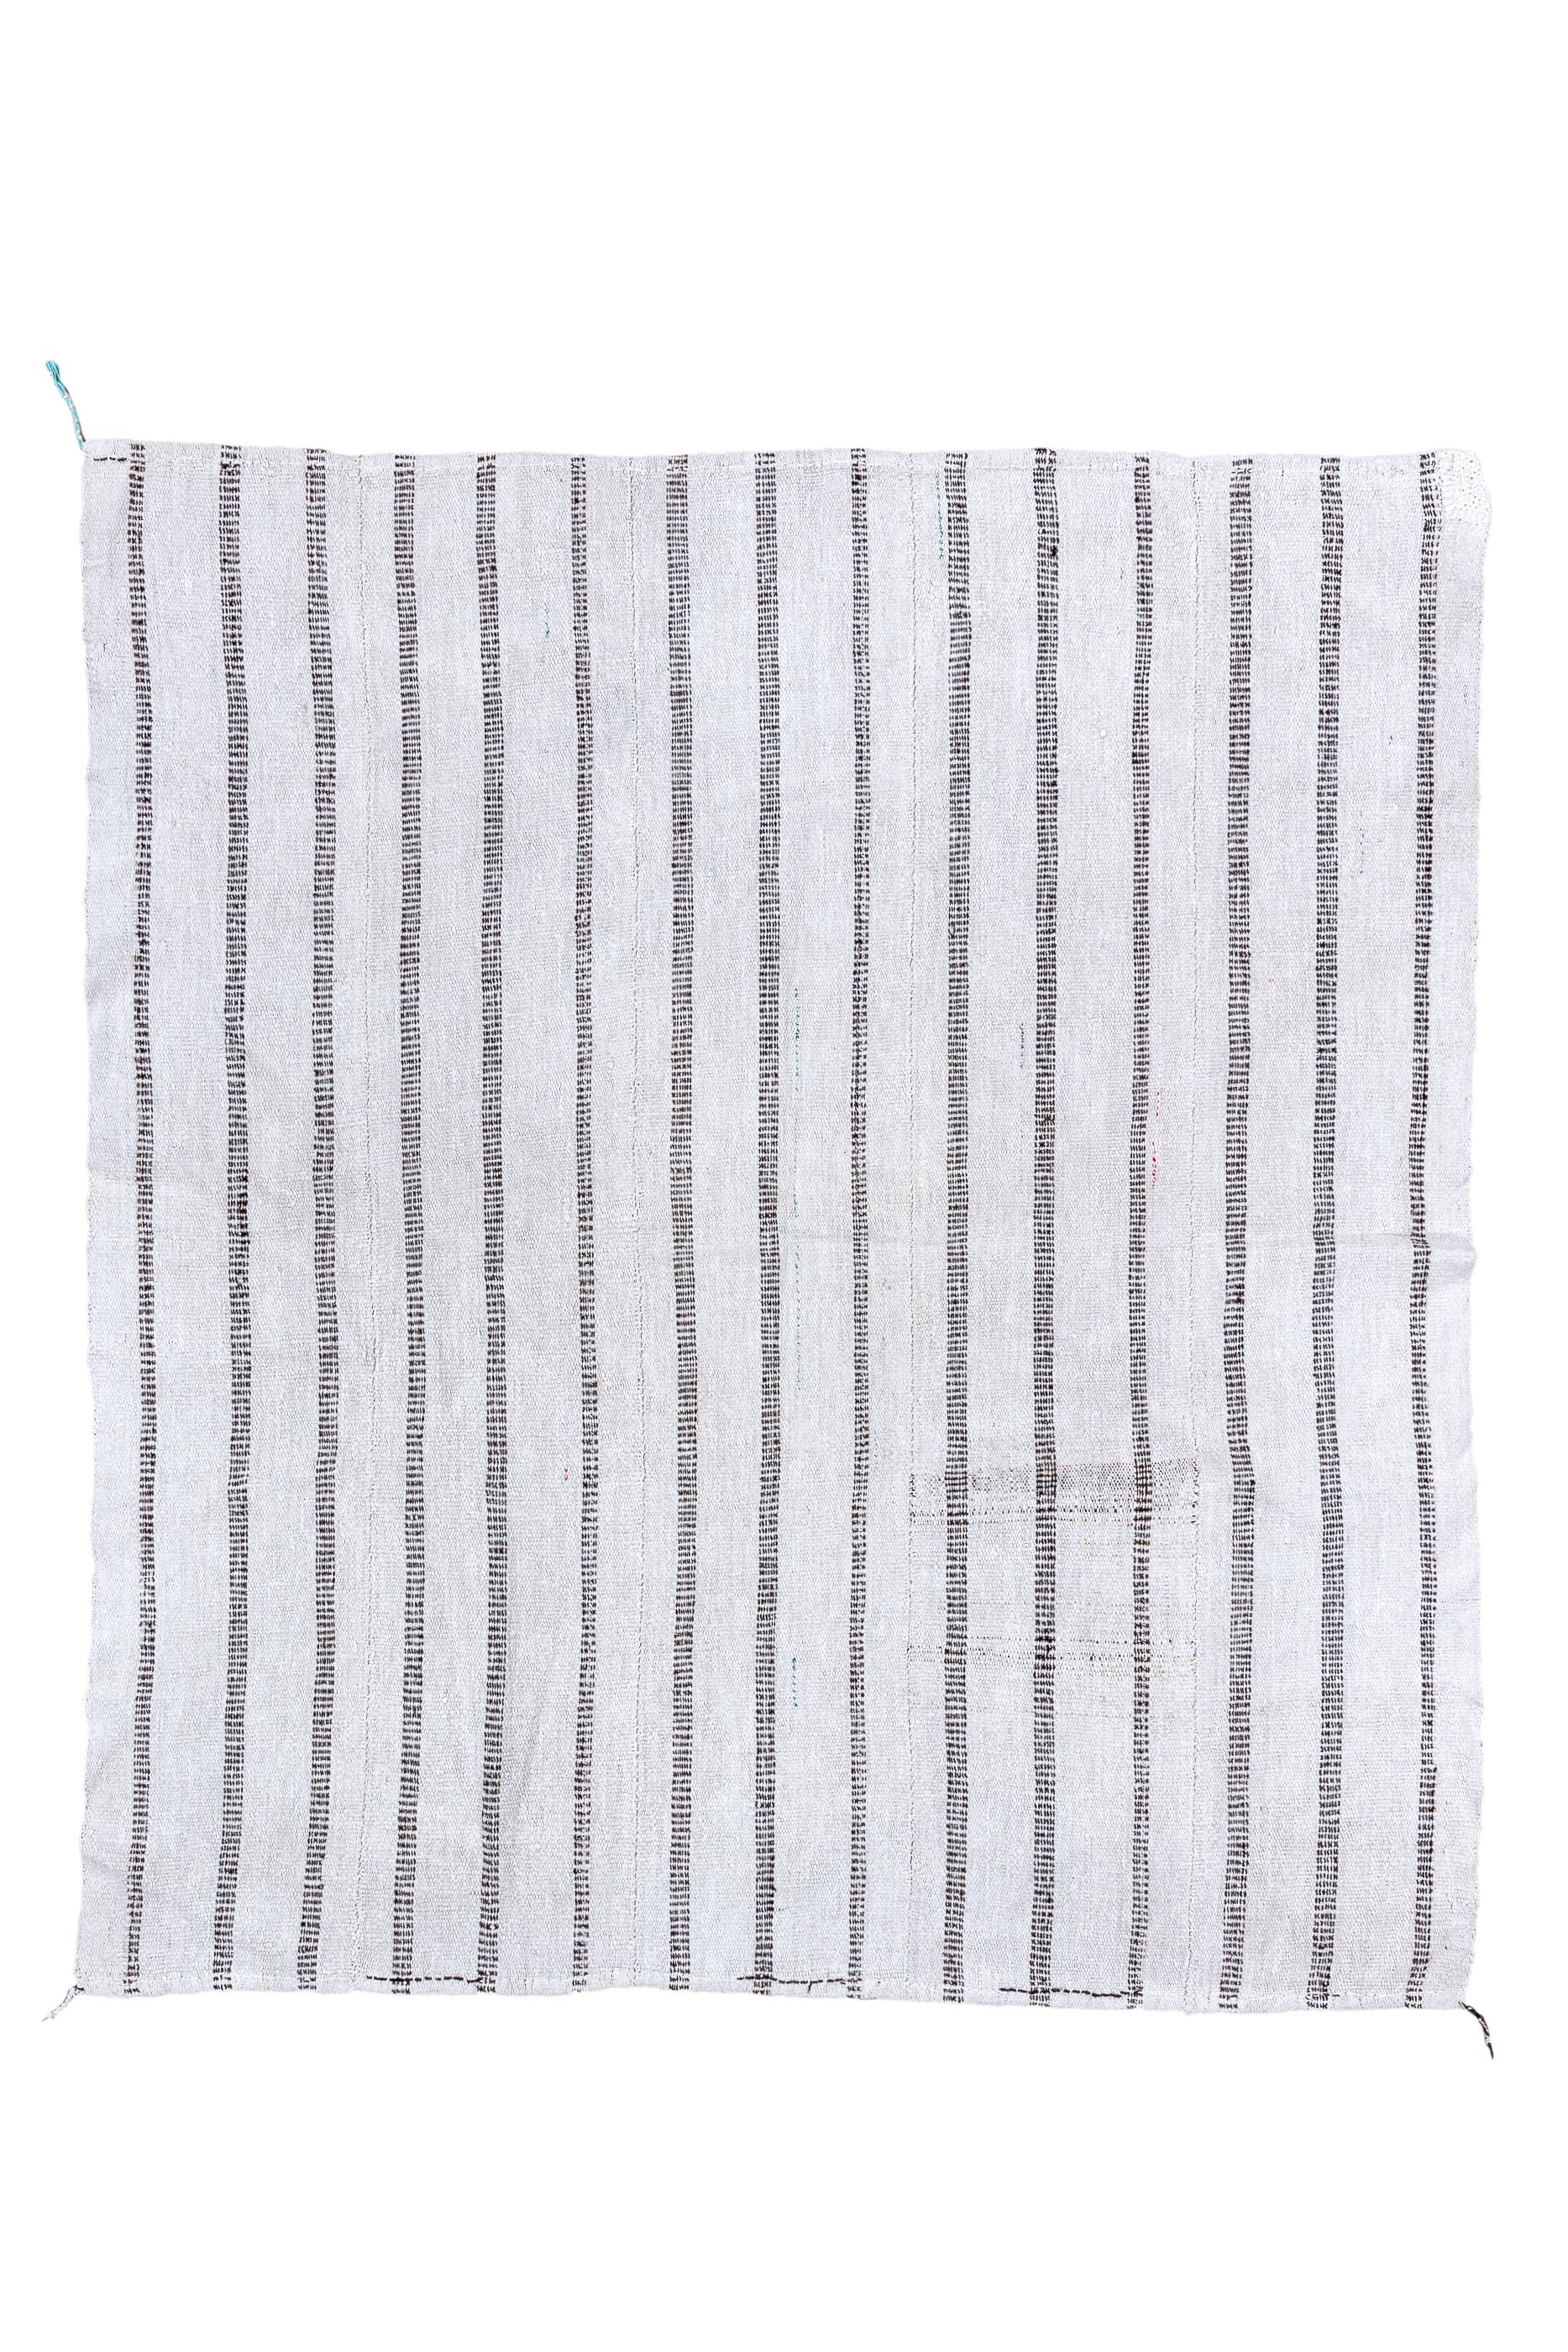 This versatile pileless flatweave, shows a cream field with a well-spaced vertical stripe pattern. Each stripe is composed of short, tiny dashes.  Adjustable dimensions. As new condition with wool facing wefts.

Rug Size
4'8x5